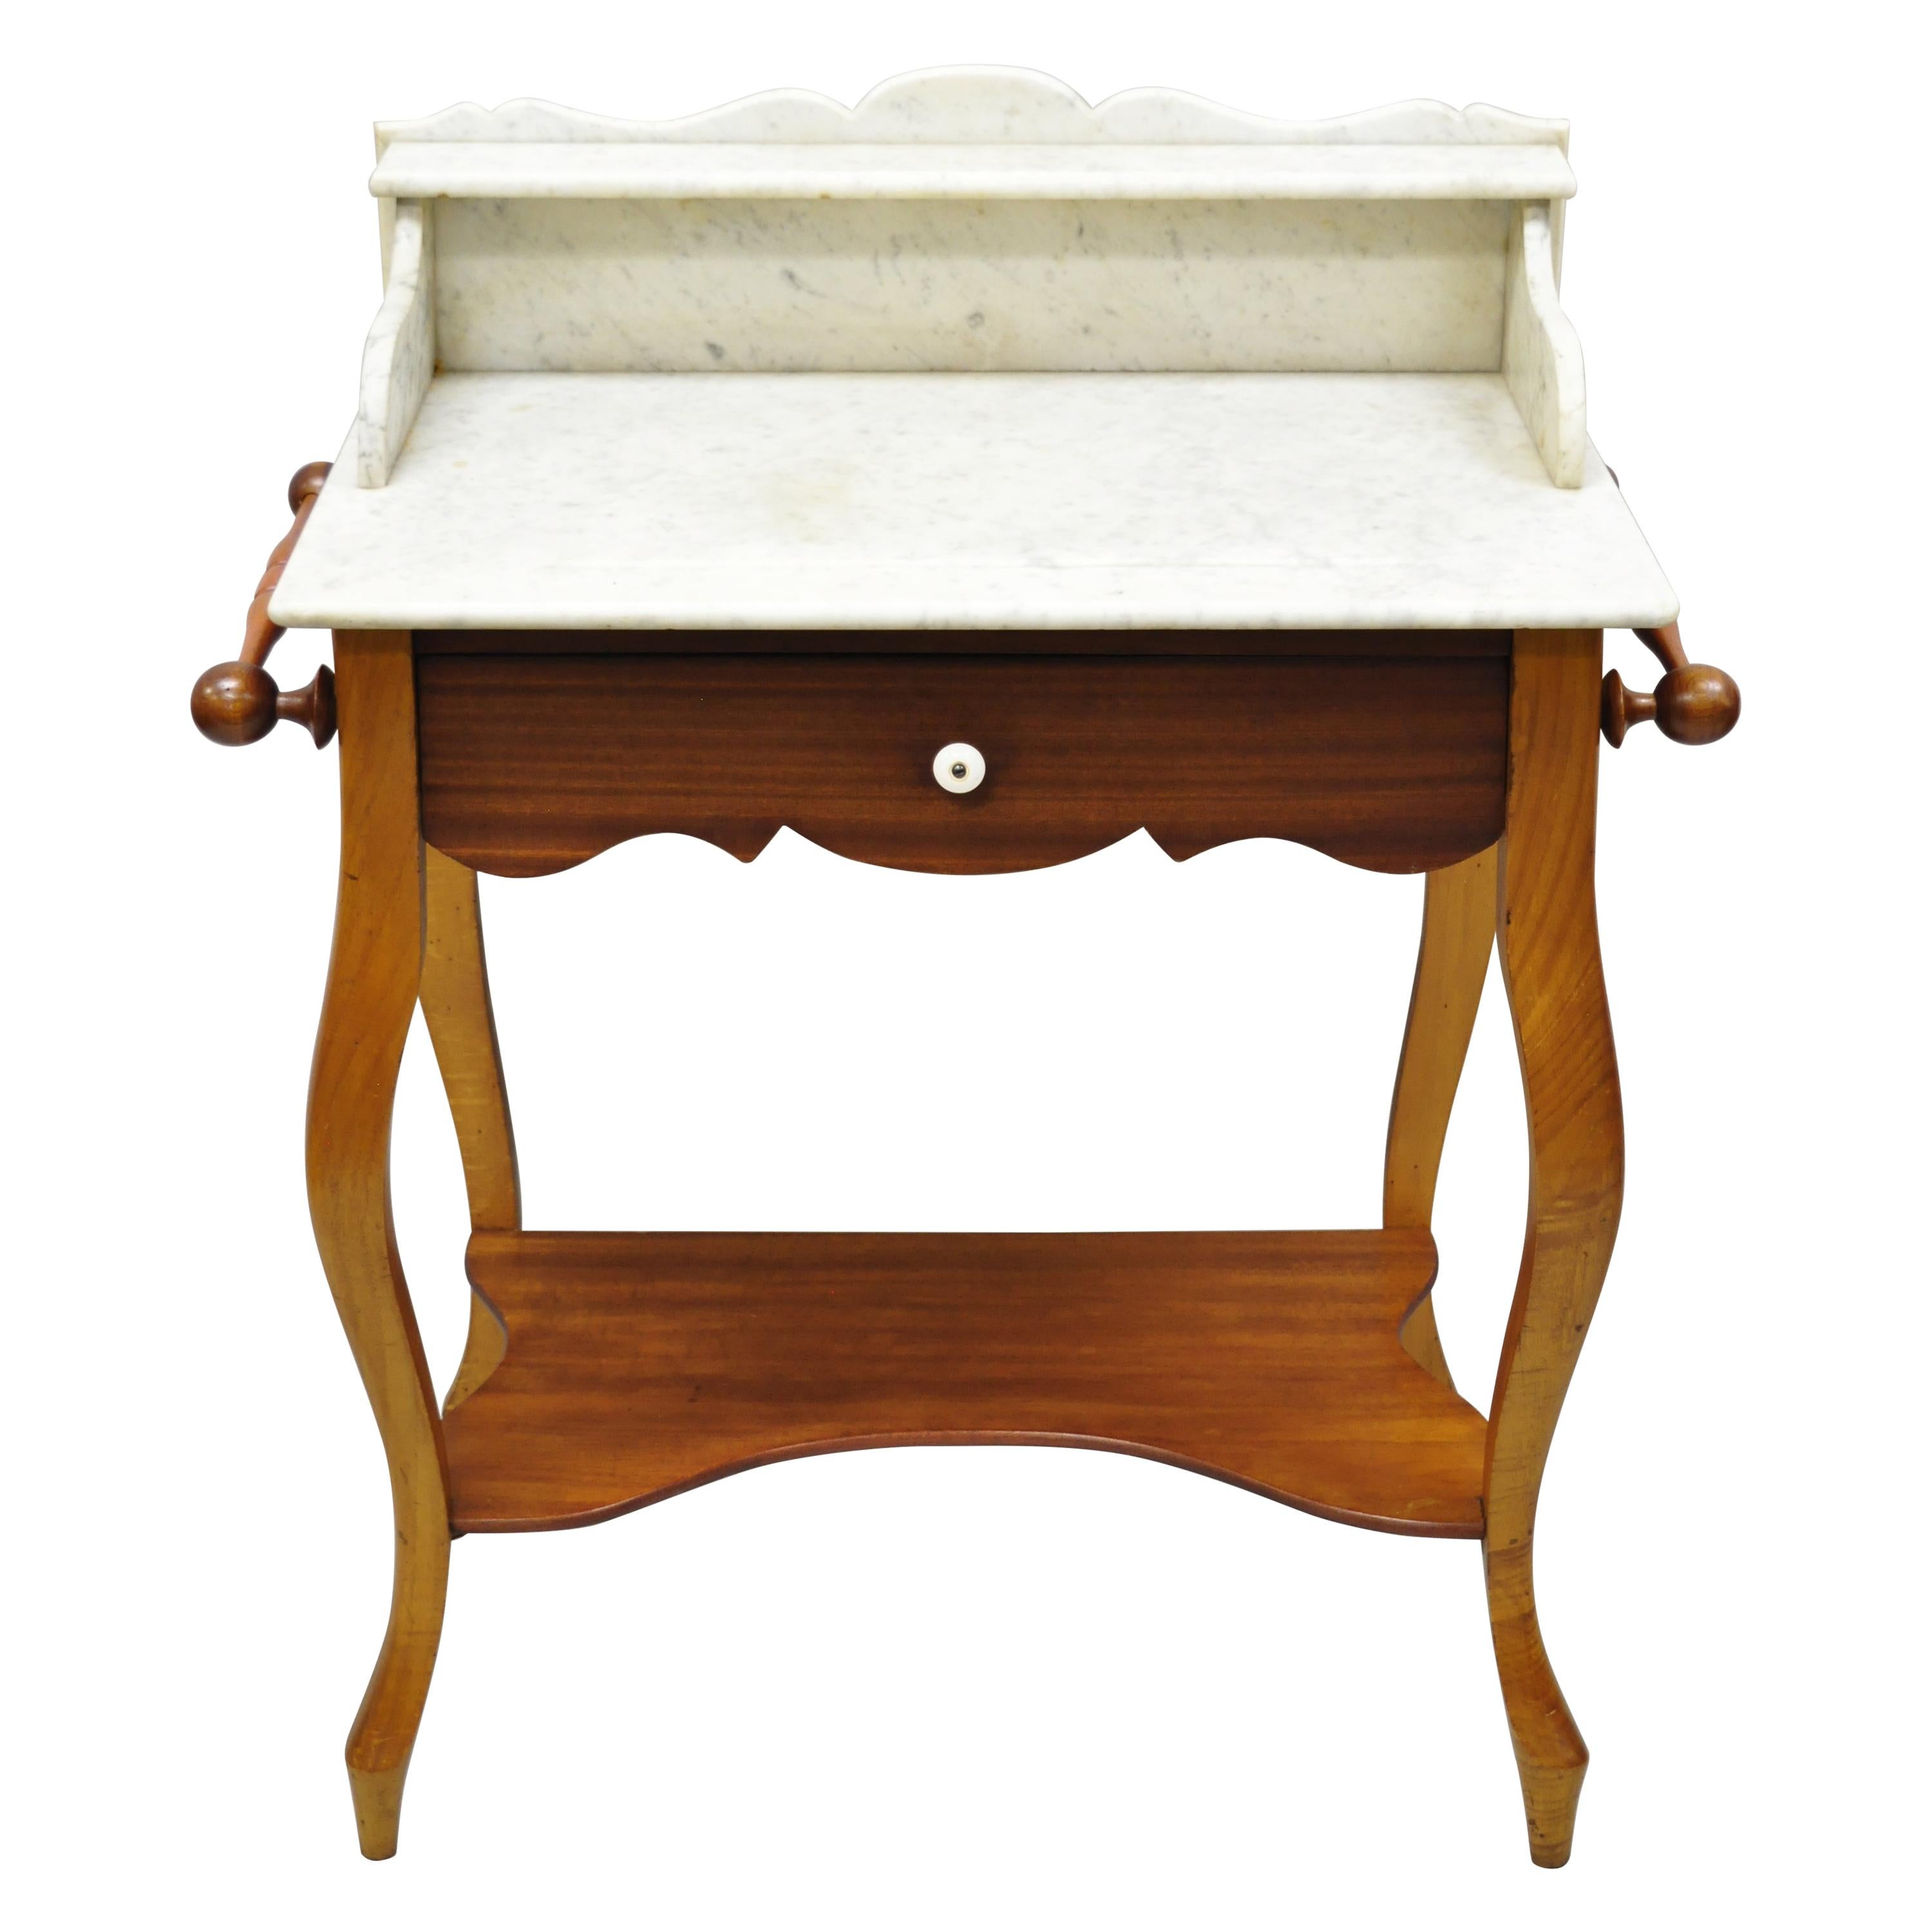 Antique American Victorian Mahogany Washstand Commode Marble Top Vanity